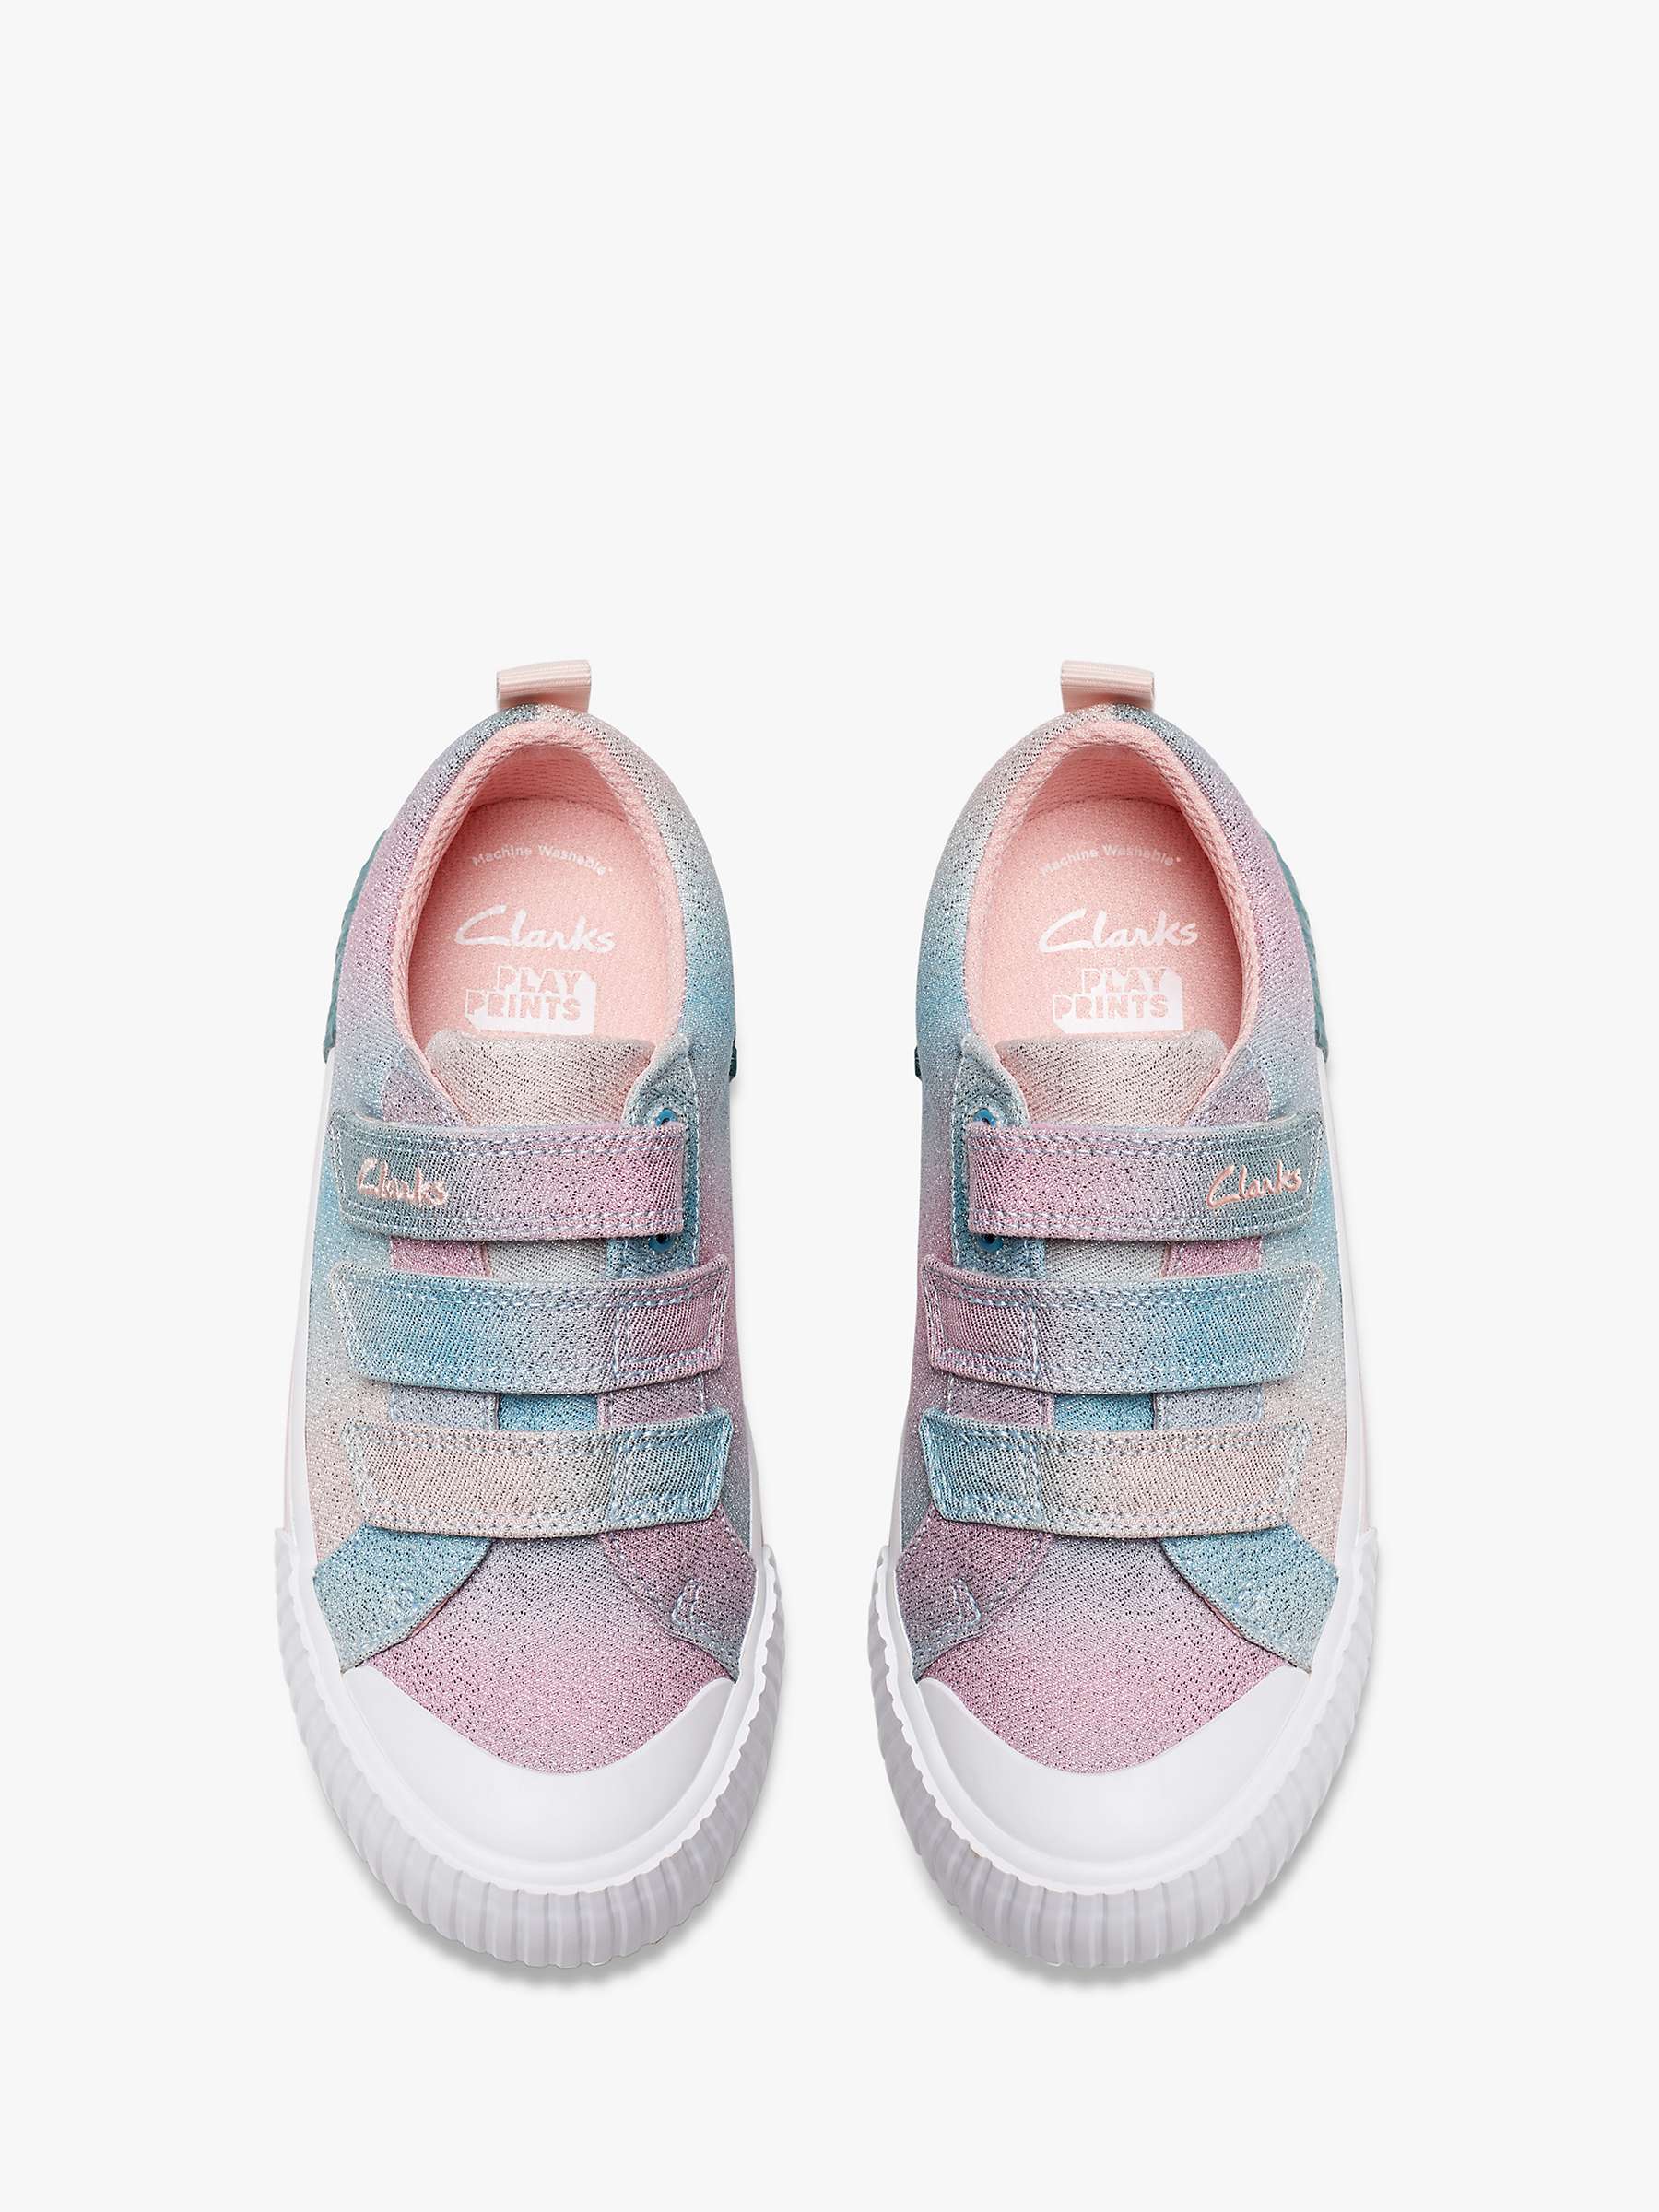 Buy Clarks Kids' Foxing Brill Glitter Trainers, Multi Online at johnlewis.com